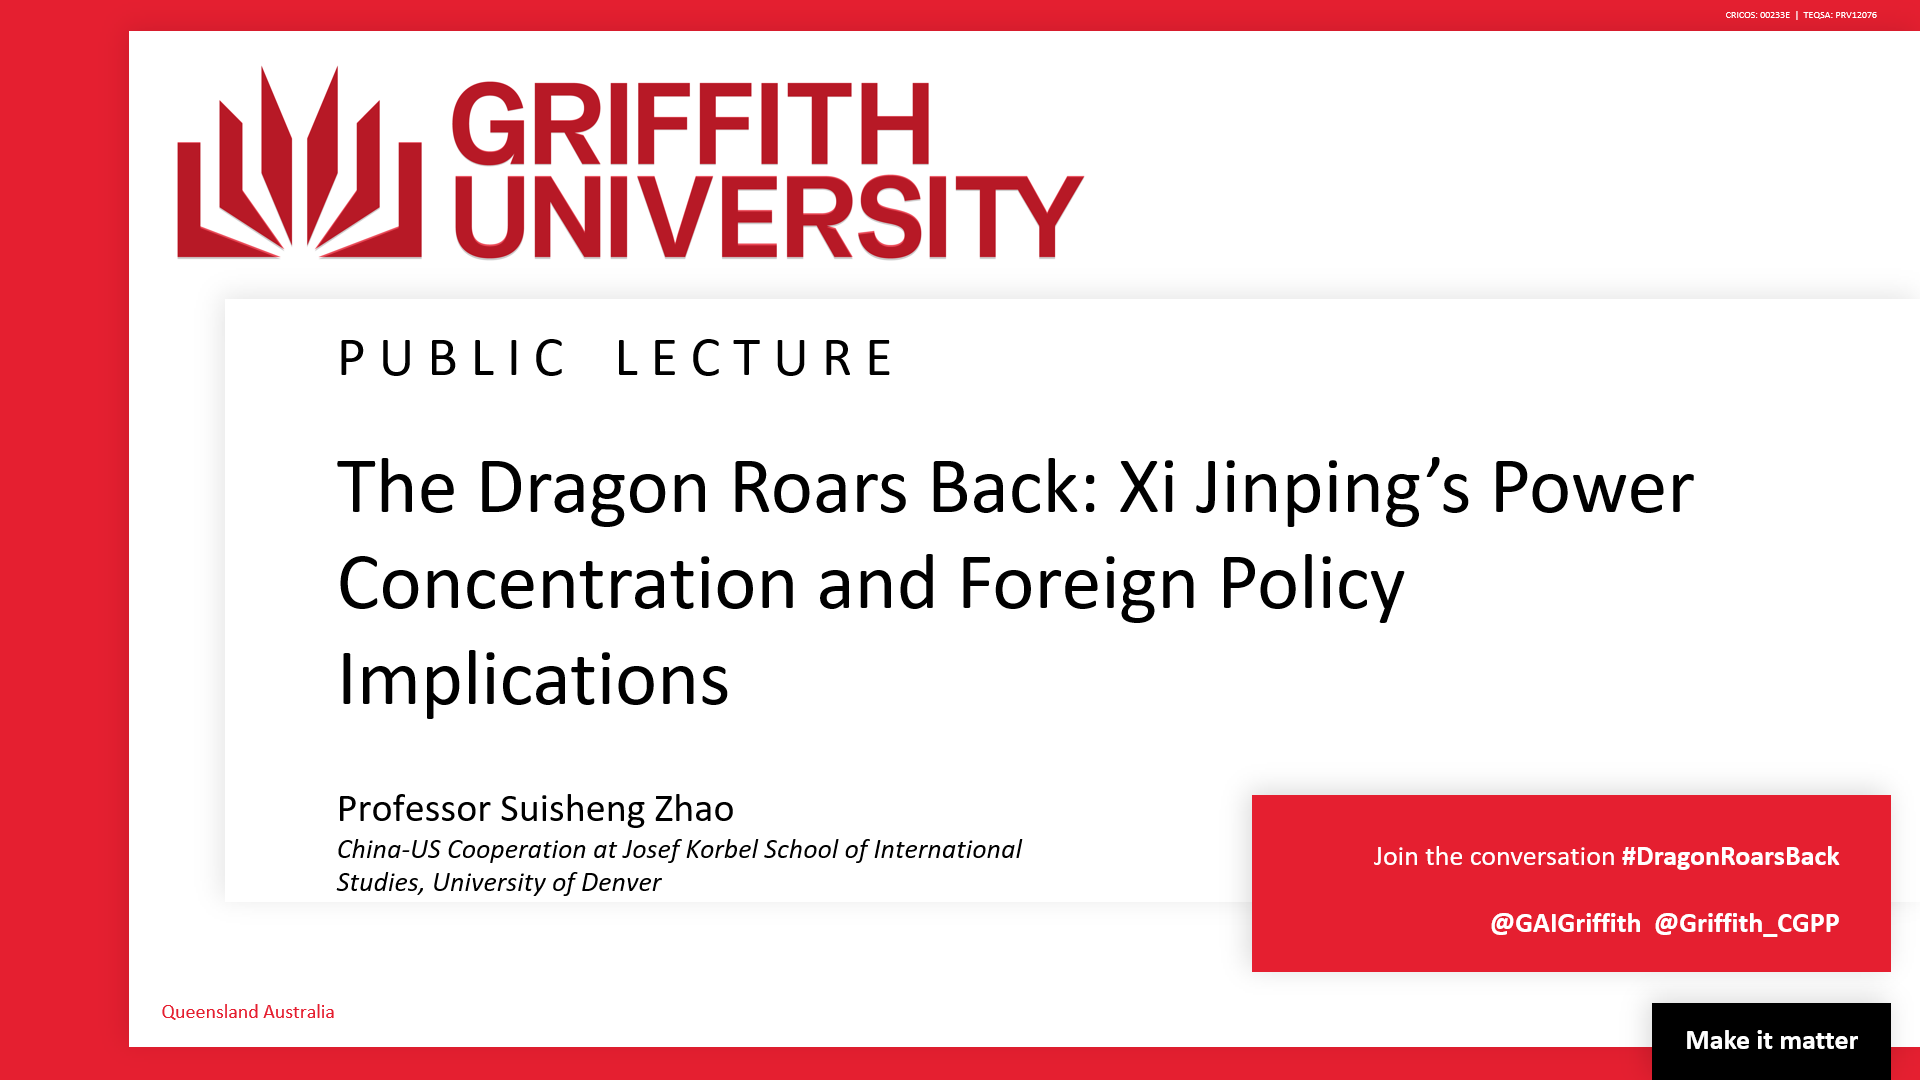 PUBLIC LECTURE: The Dragon Roars Back: Xi Jinping's Power Concentration and Foreign Policy Implications